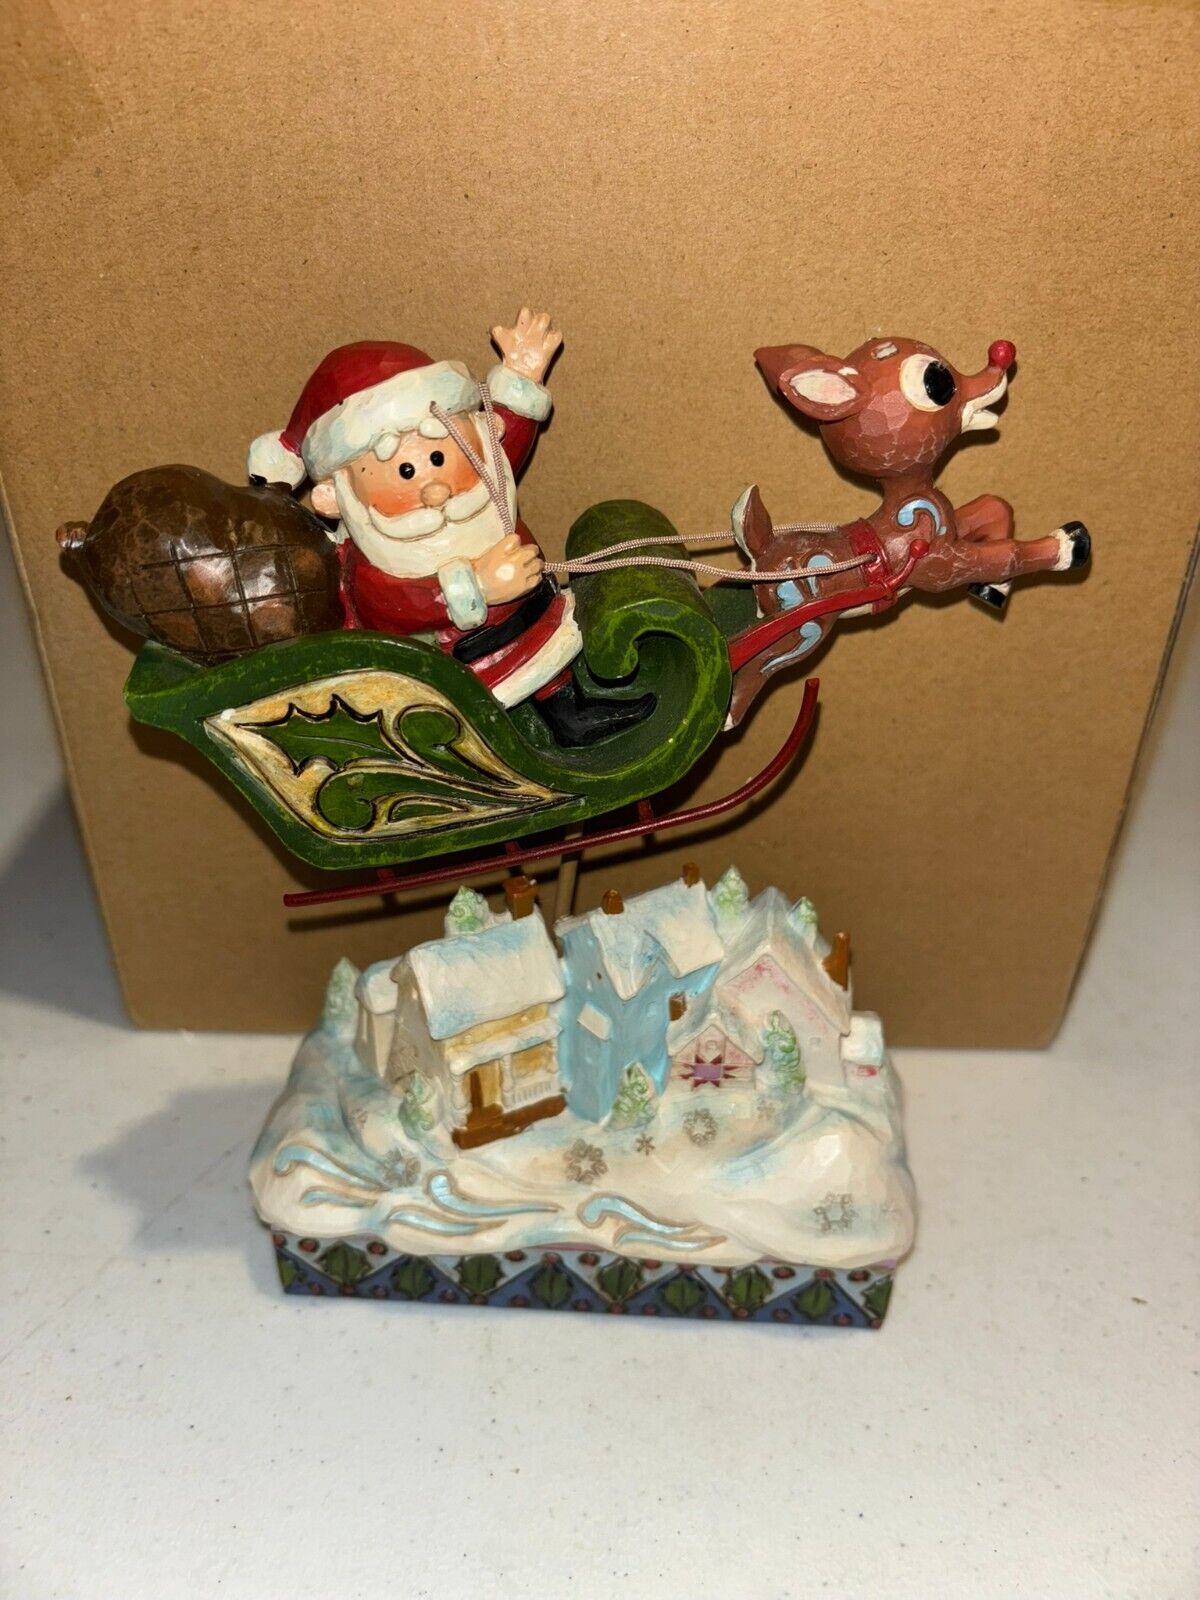 Jim Shore Rudolph The Red-Nosed Reindeer Santa Sleigh Statue 6001593 RARE READ